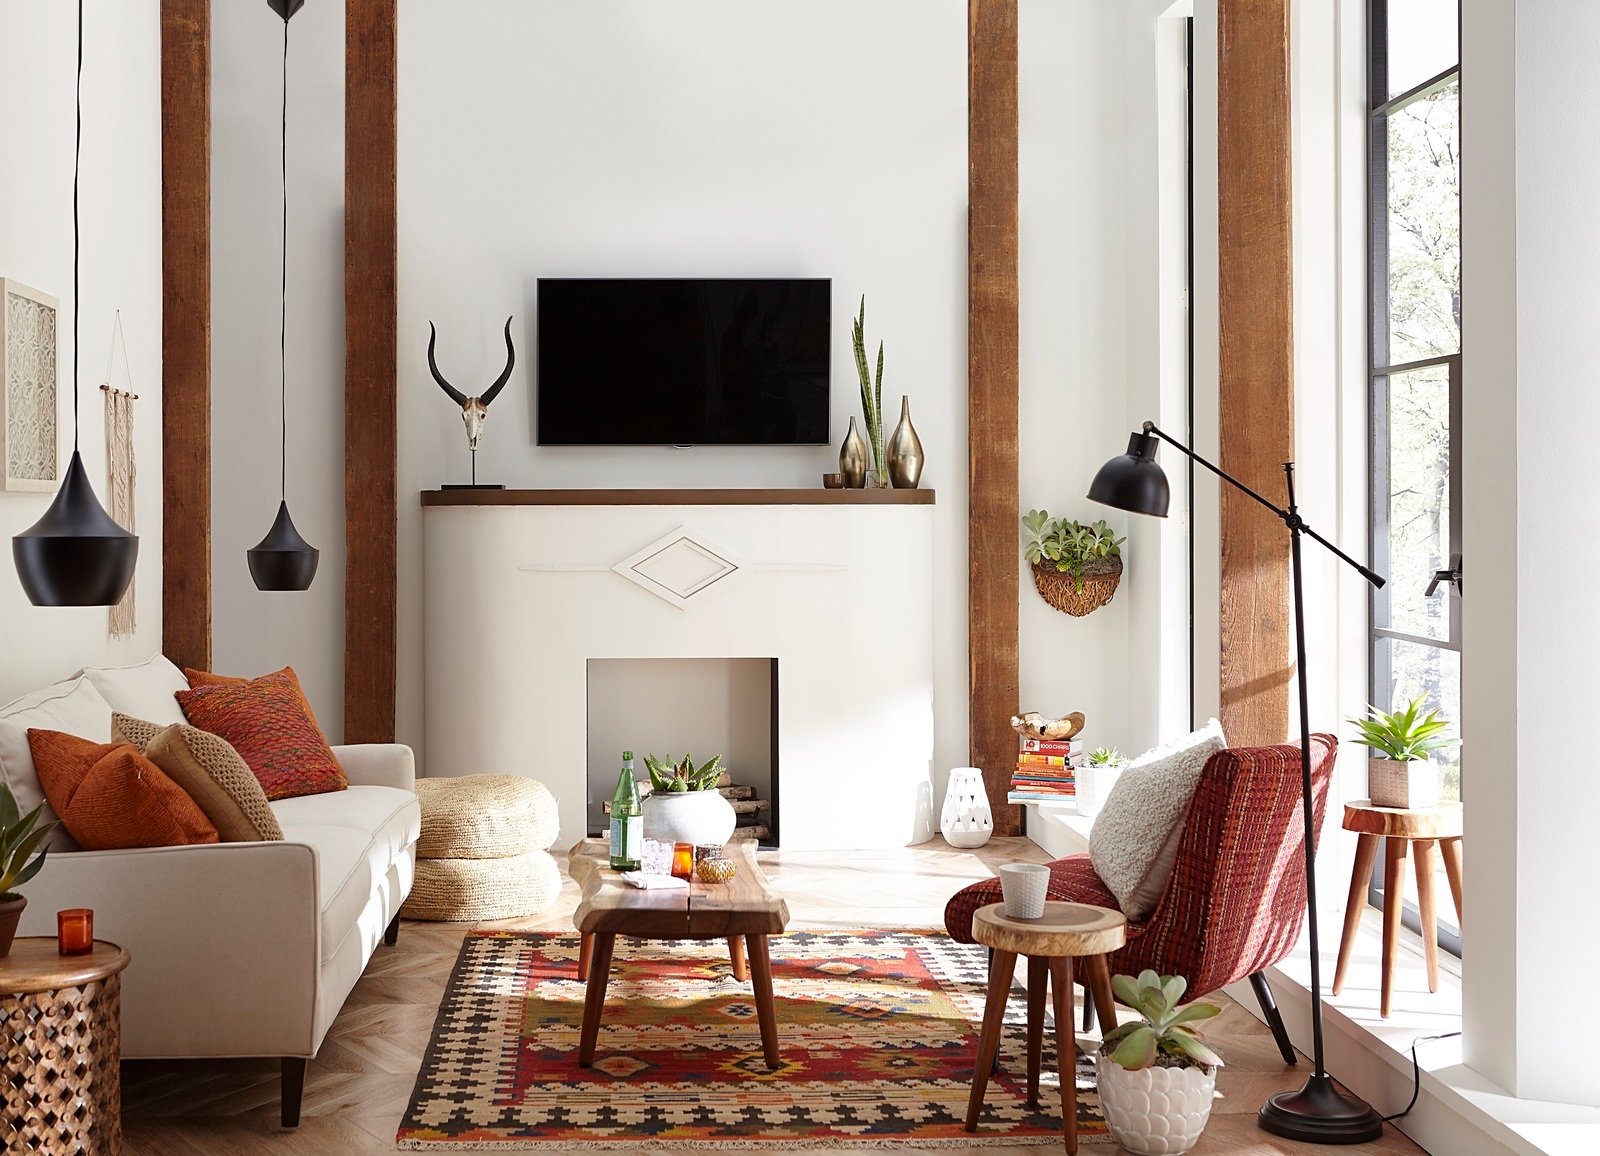 TV mounted over fireplace southwest style room